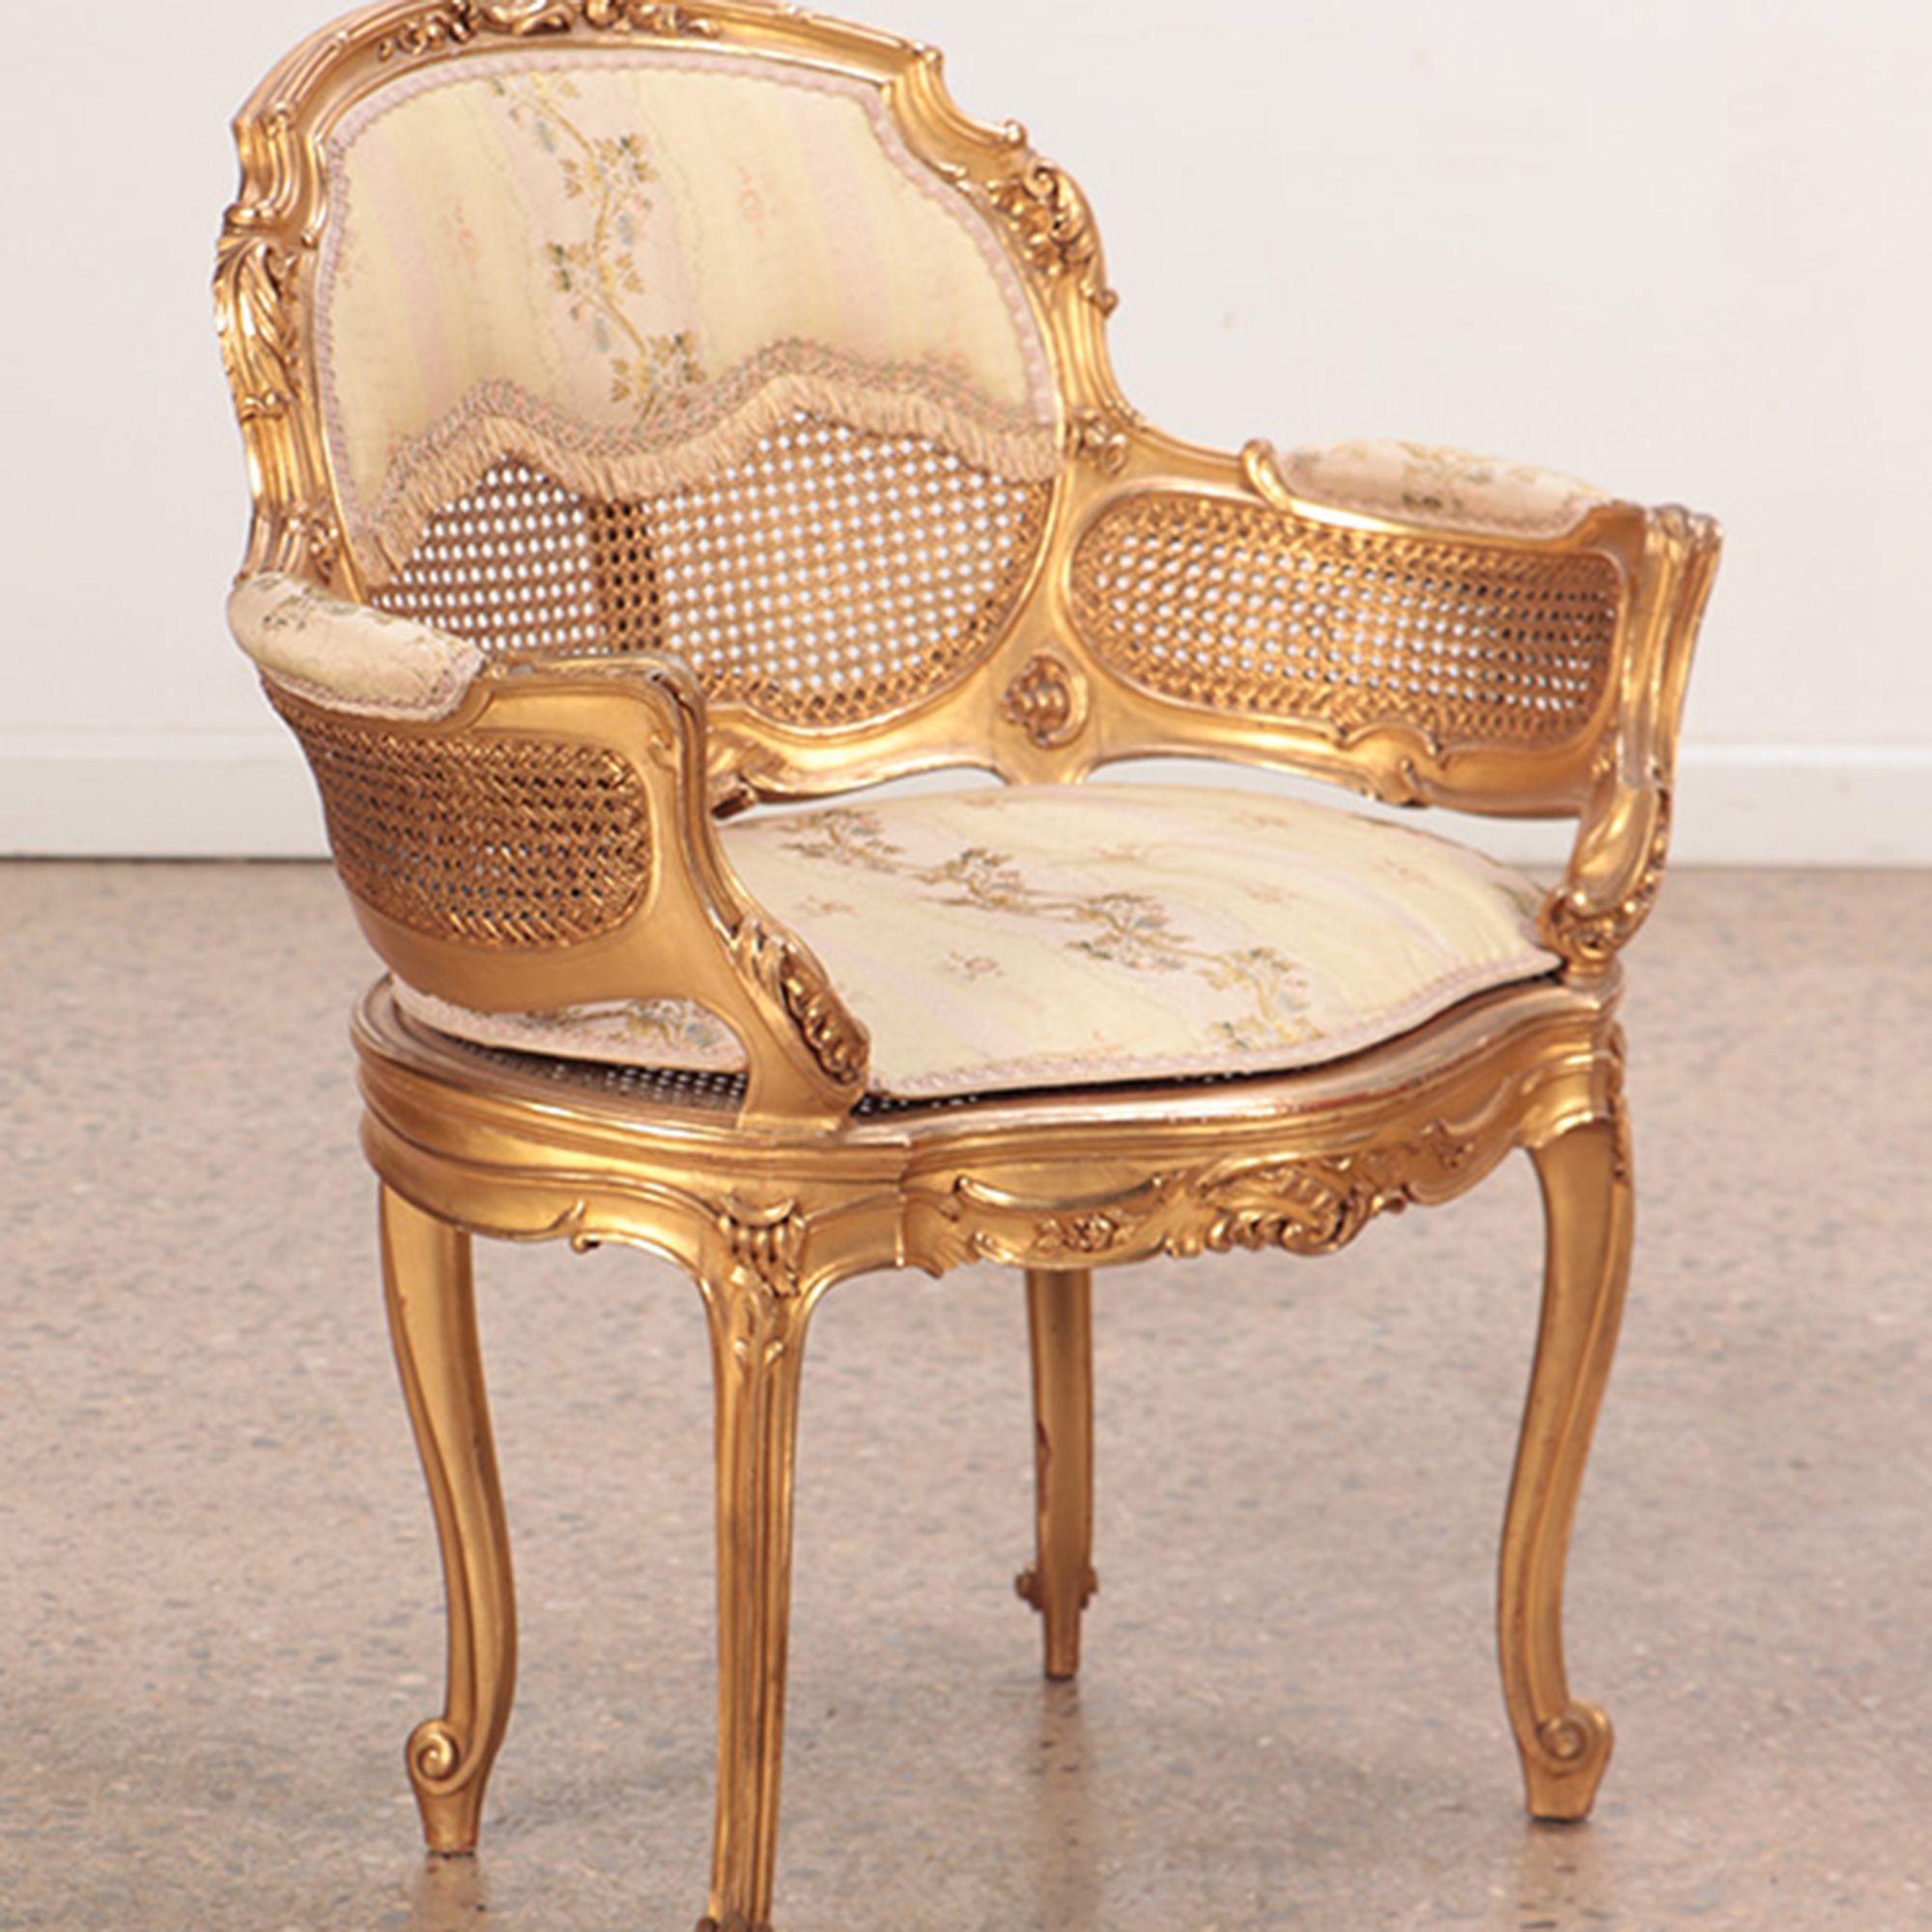 A pair of giltwood and carved French Louis XV style bergere chairs in original gilt finish, circa 1900.